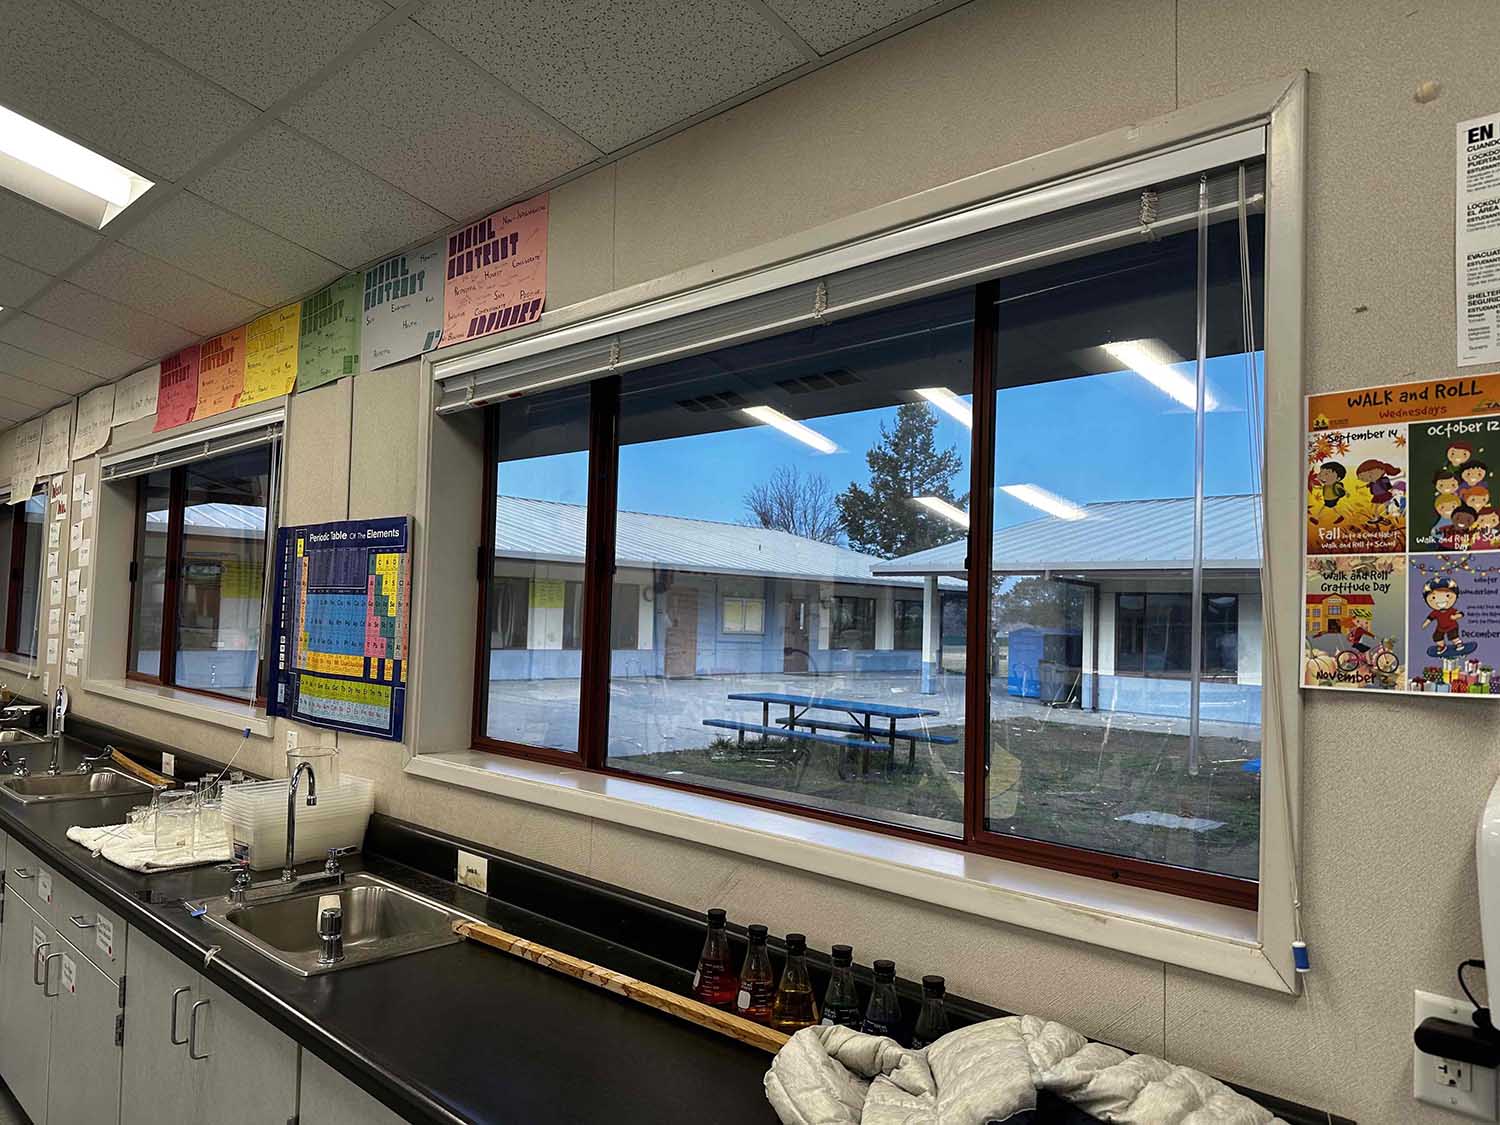 See what 3M Affinity Window Film can do for a classroom in San Rafael, CA. Installed by ClimatePro.